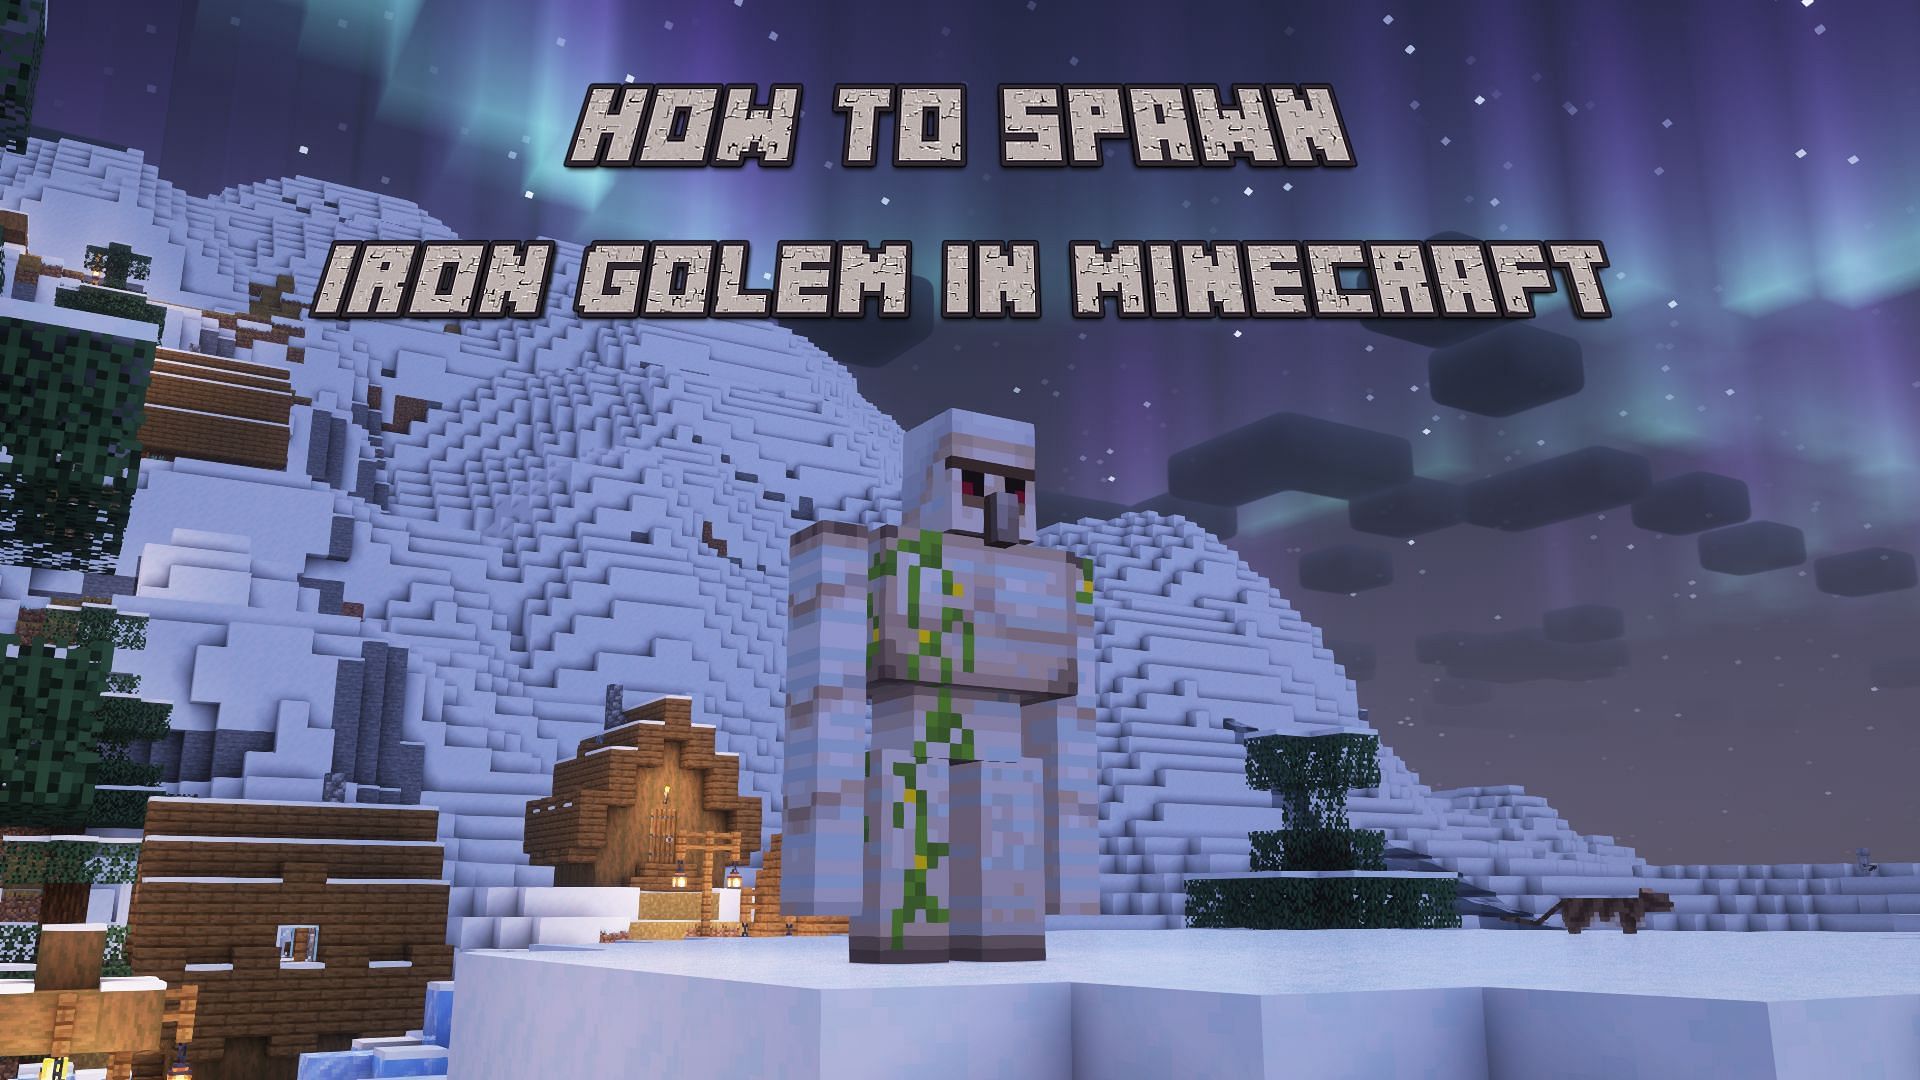 An iron golem in the game (Image via Mojang)